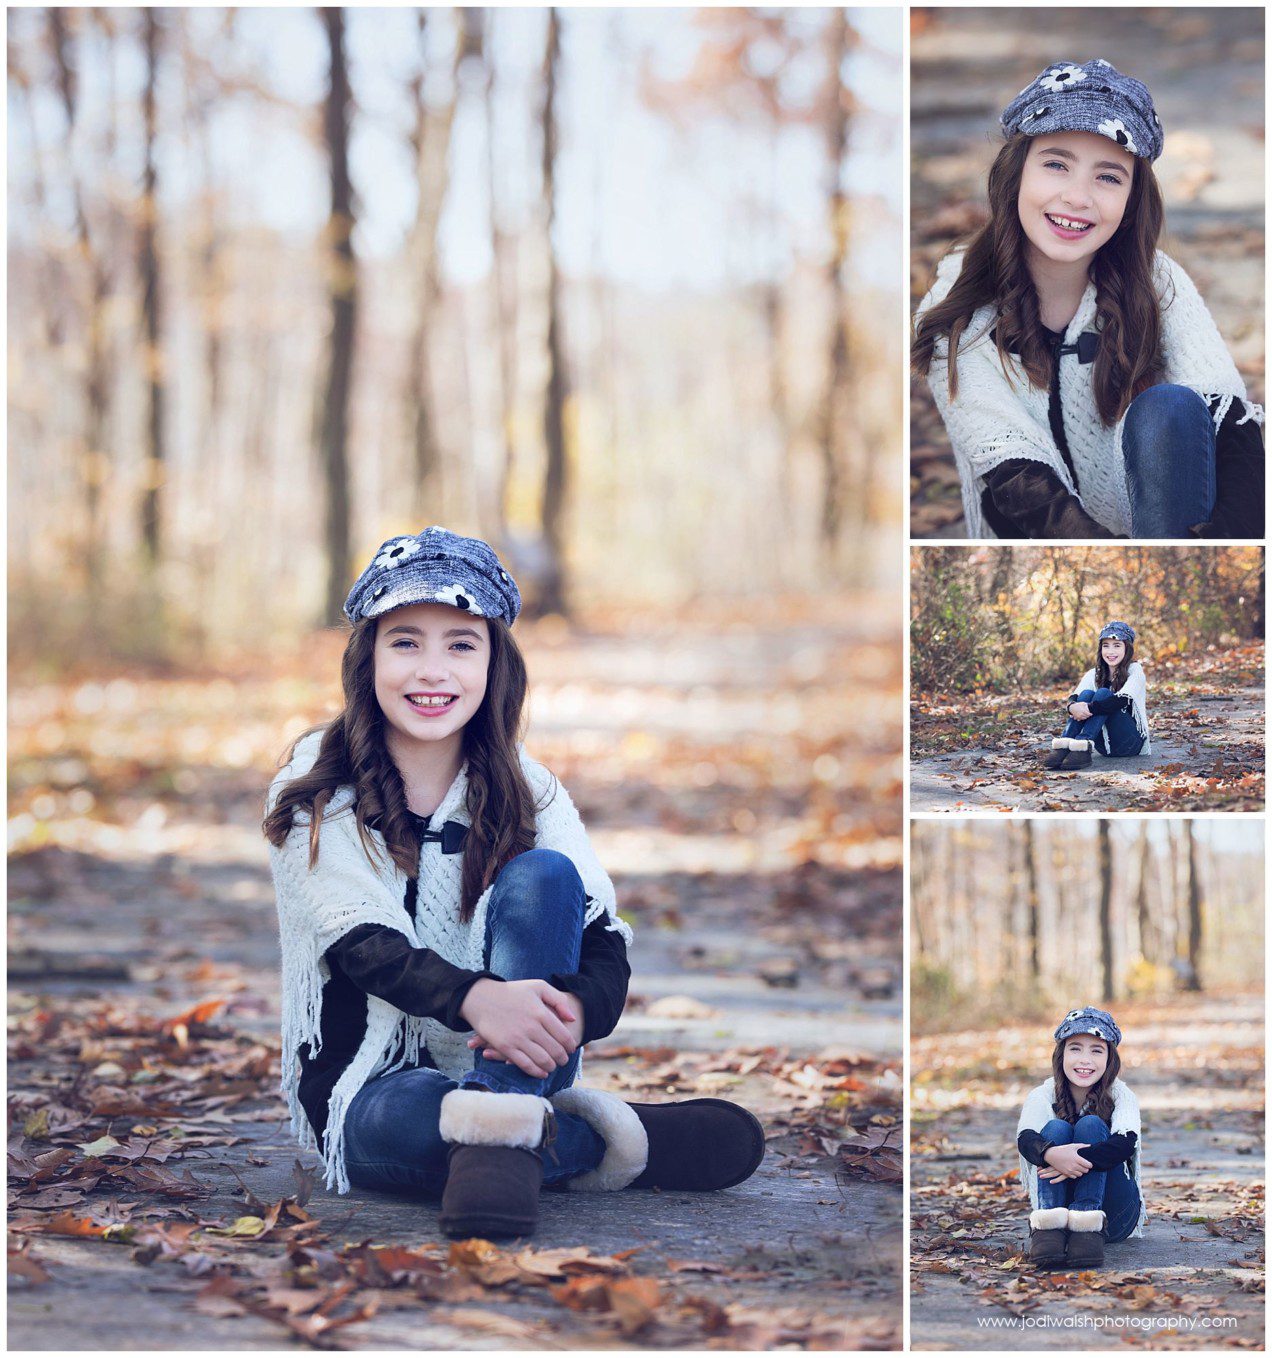 tween girl in pageboy hat sitting in the fall leaves